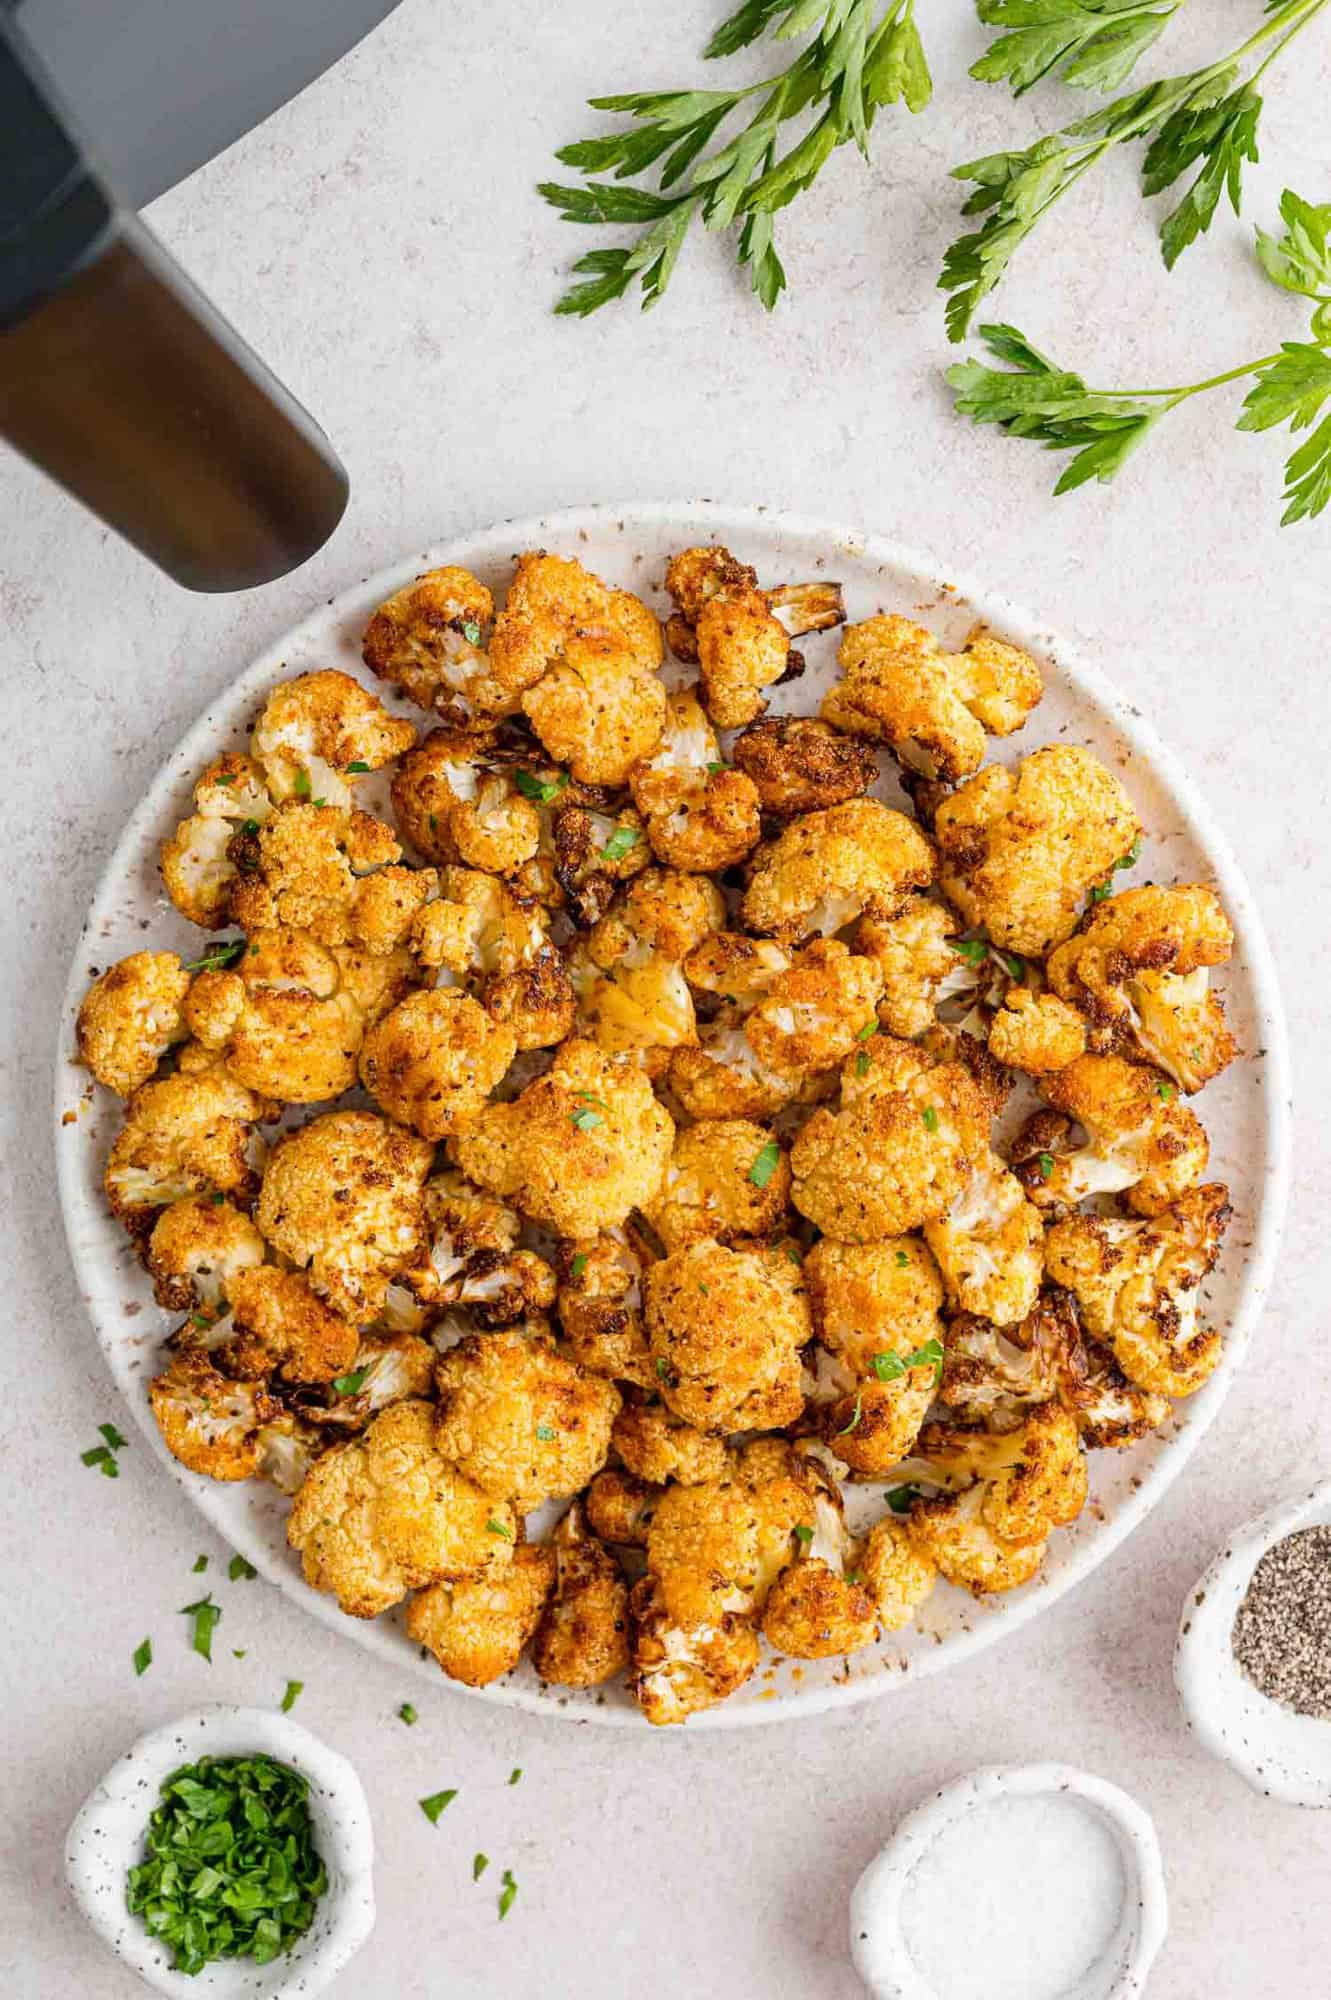 Overhead view of air fried cauliflower on a plate garnished with parsley, next to the air fryer.